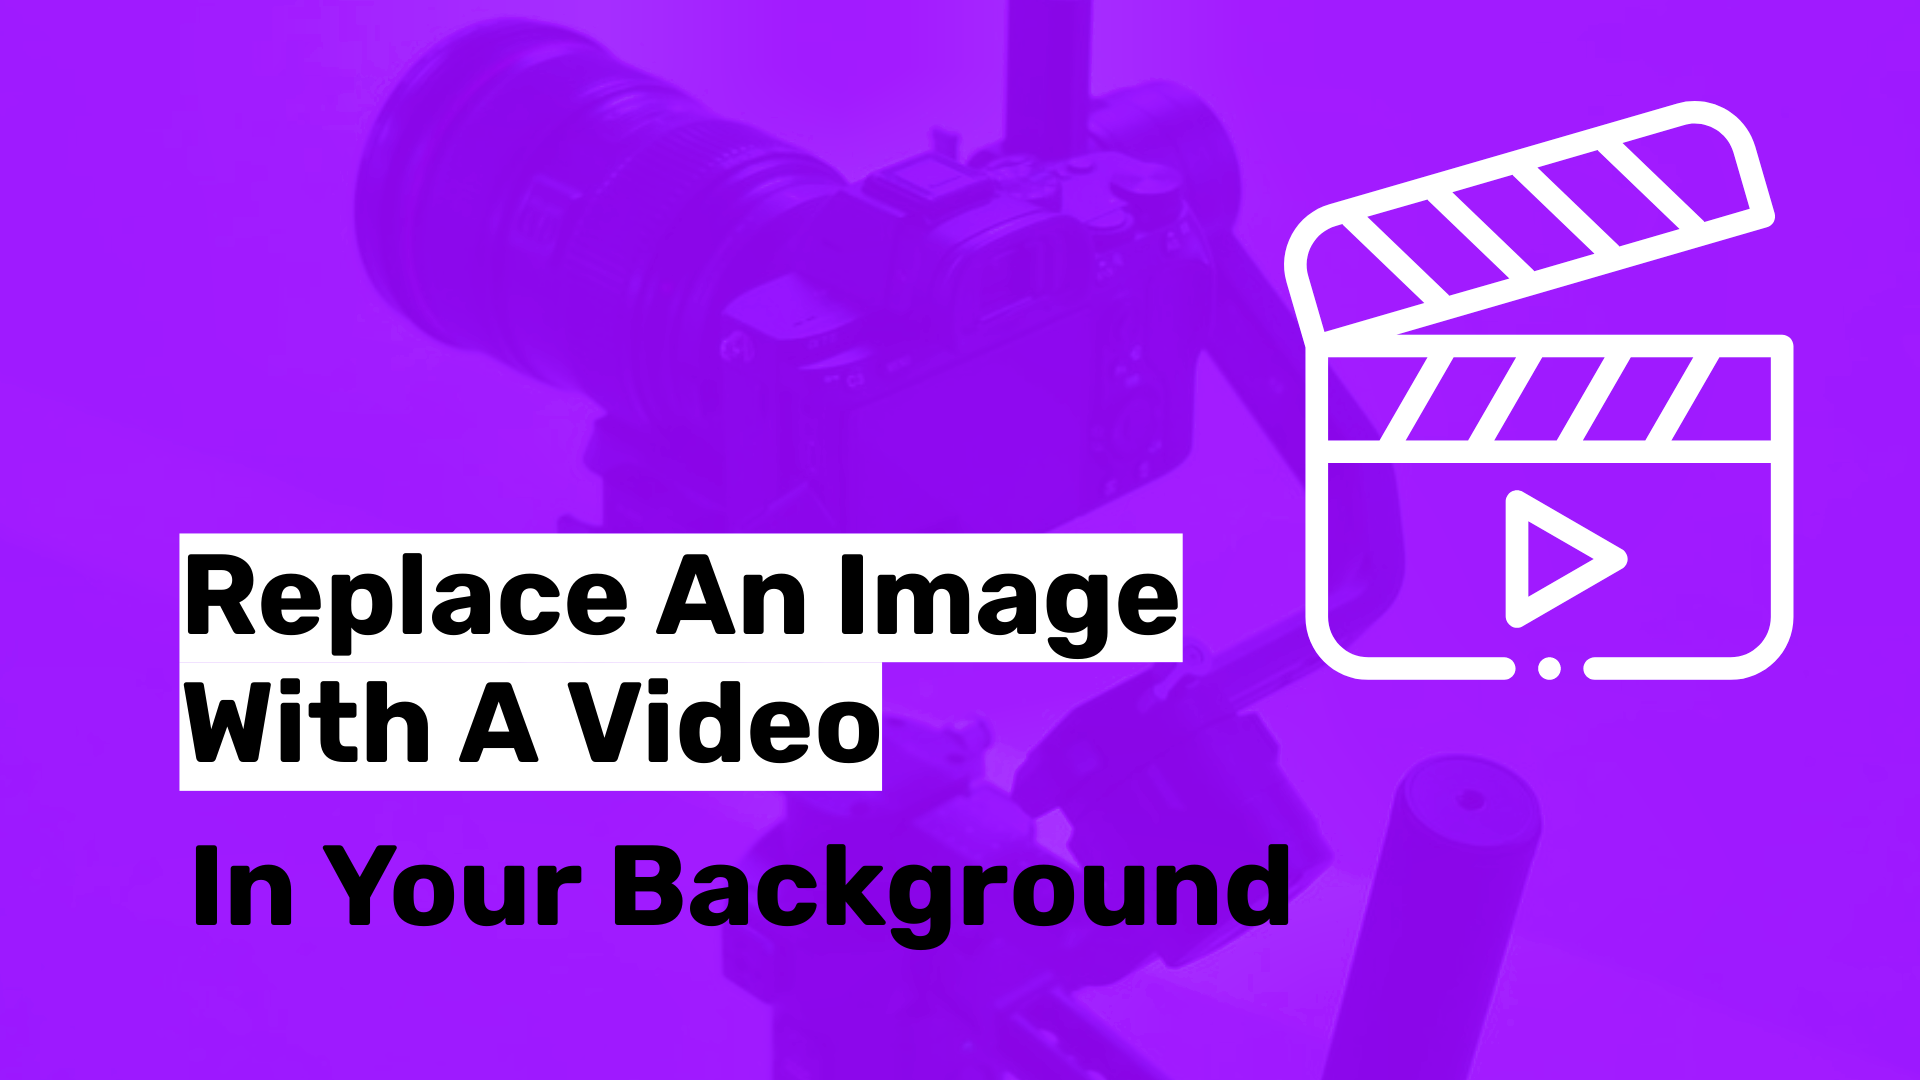 How to replace an image with a video in your background